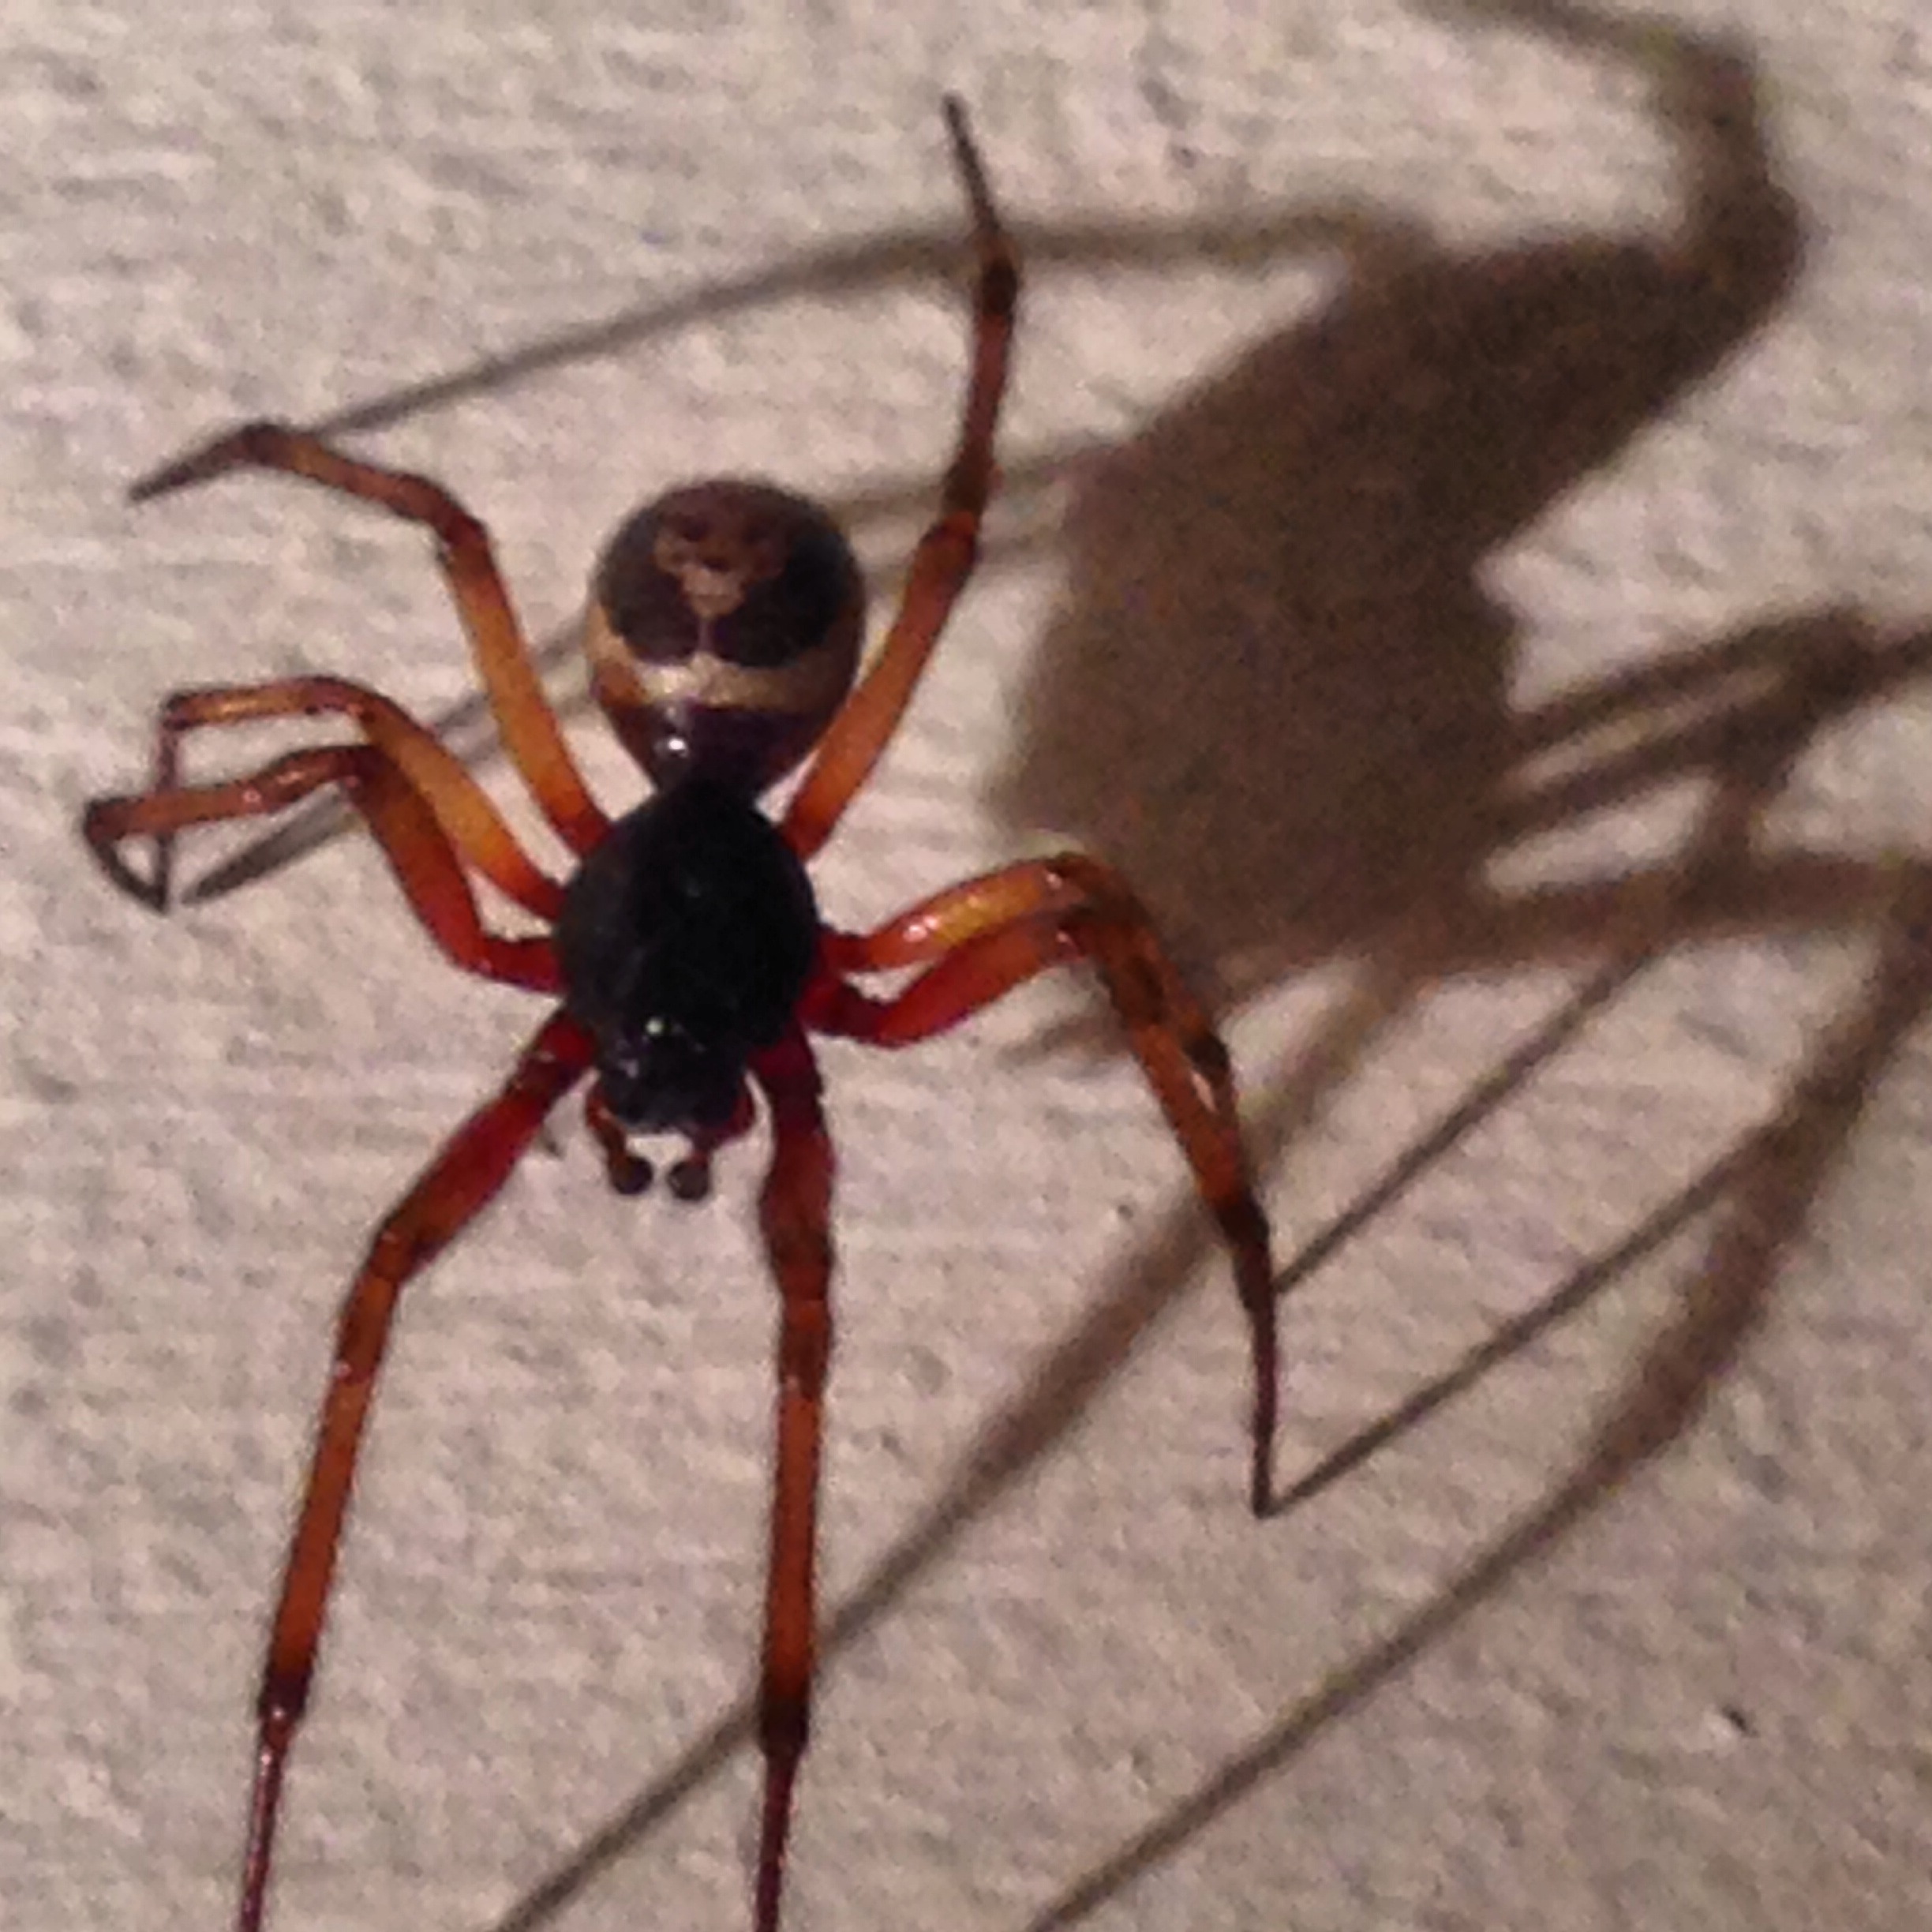 This spider has a skull on its butt - Imgur